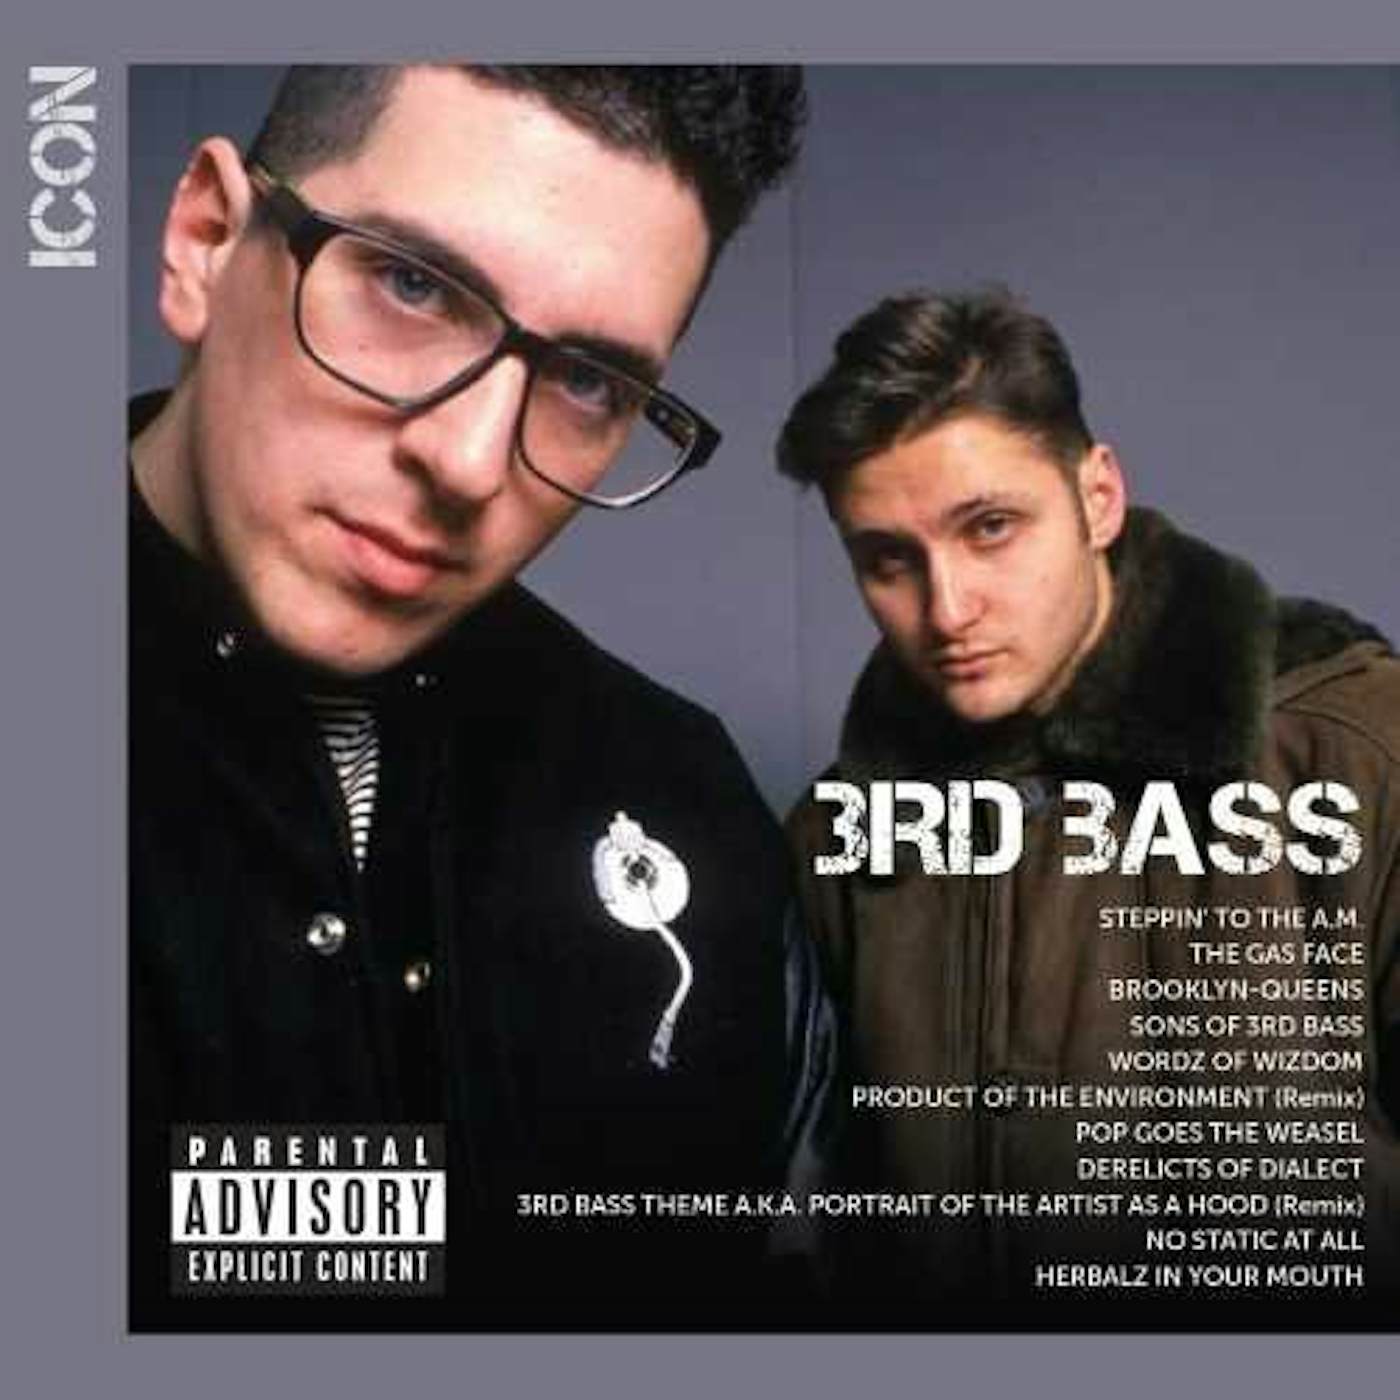 3rd Bass ICON CD